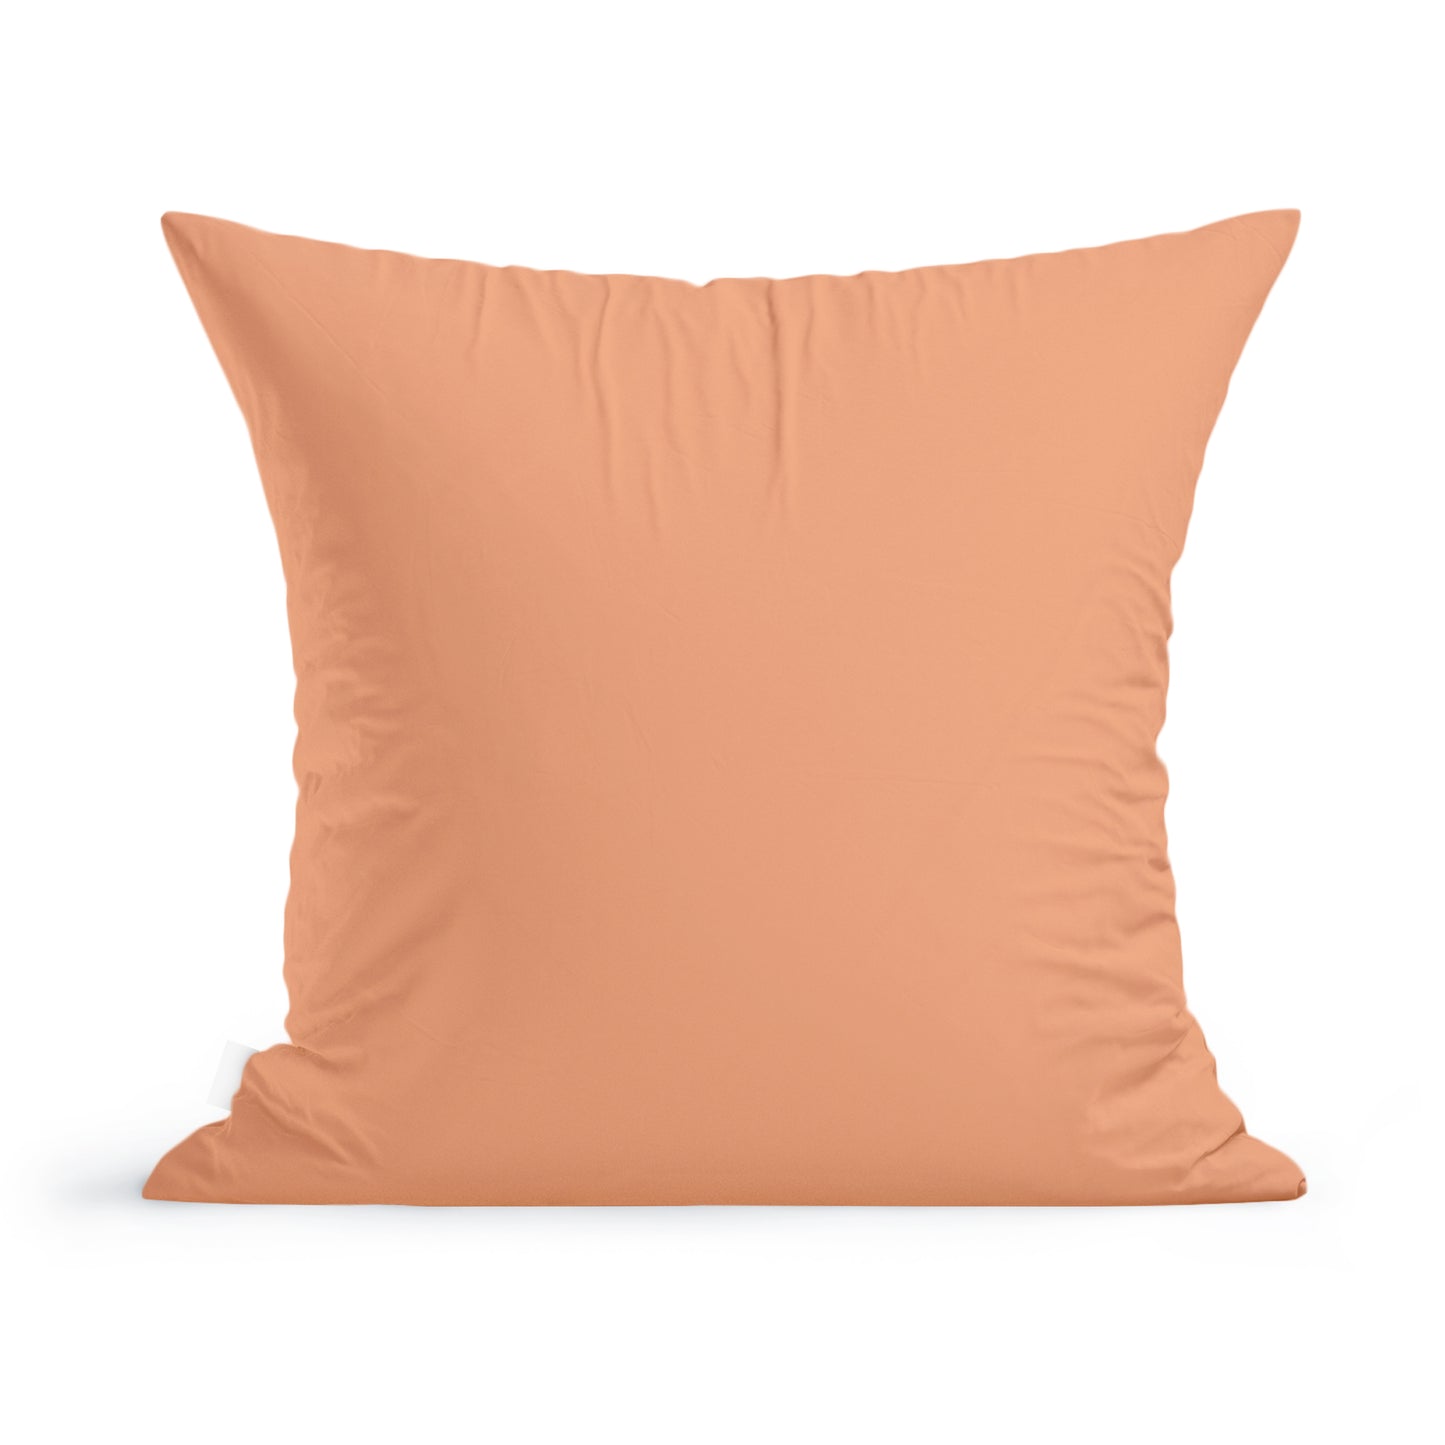 A plain peach-colored Rustic County Little Birds Pillow, ideal as nursery decor, on a white background.